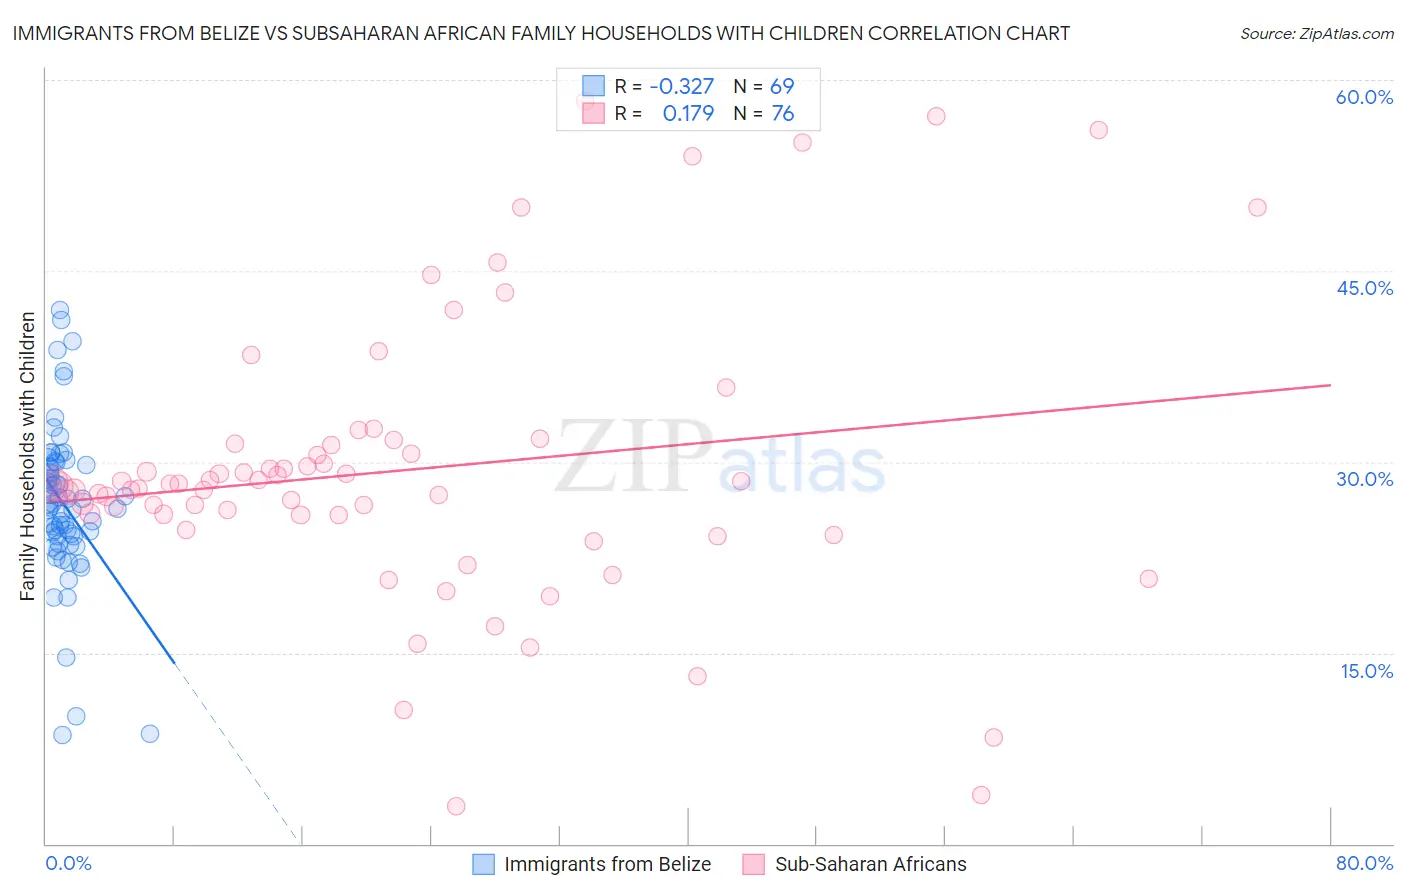 Immigrants from Belize vs Subsaharan African Family Households with Children